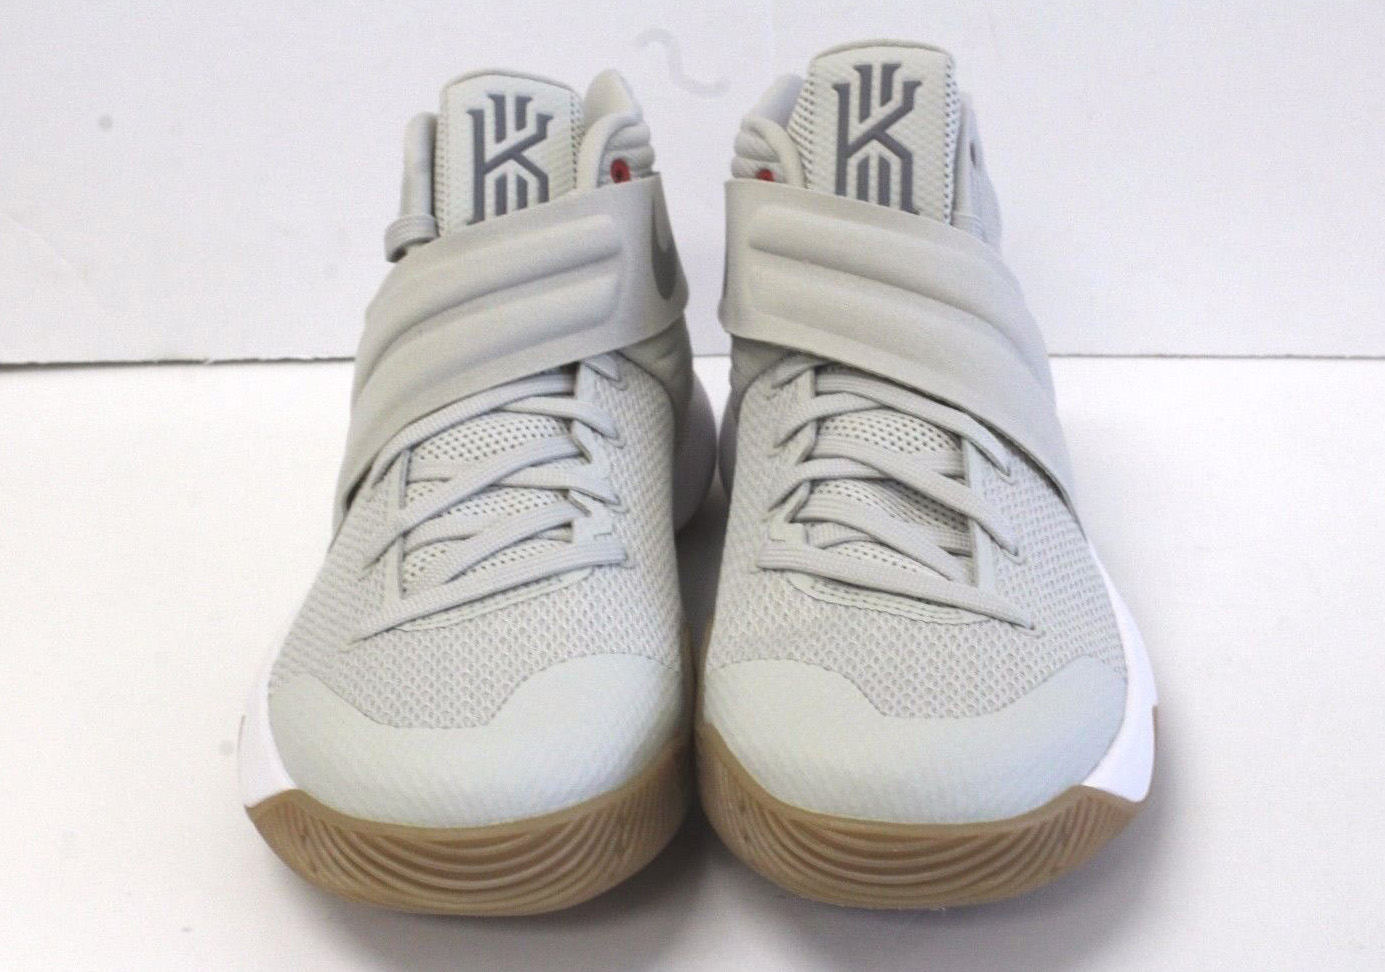 Nike Kyrie 2 Gum Bottom | Sole Collector